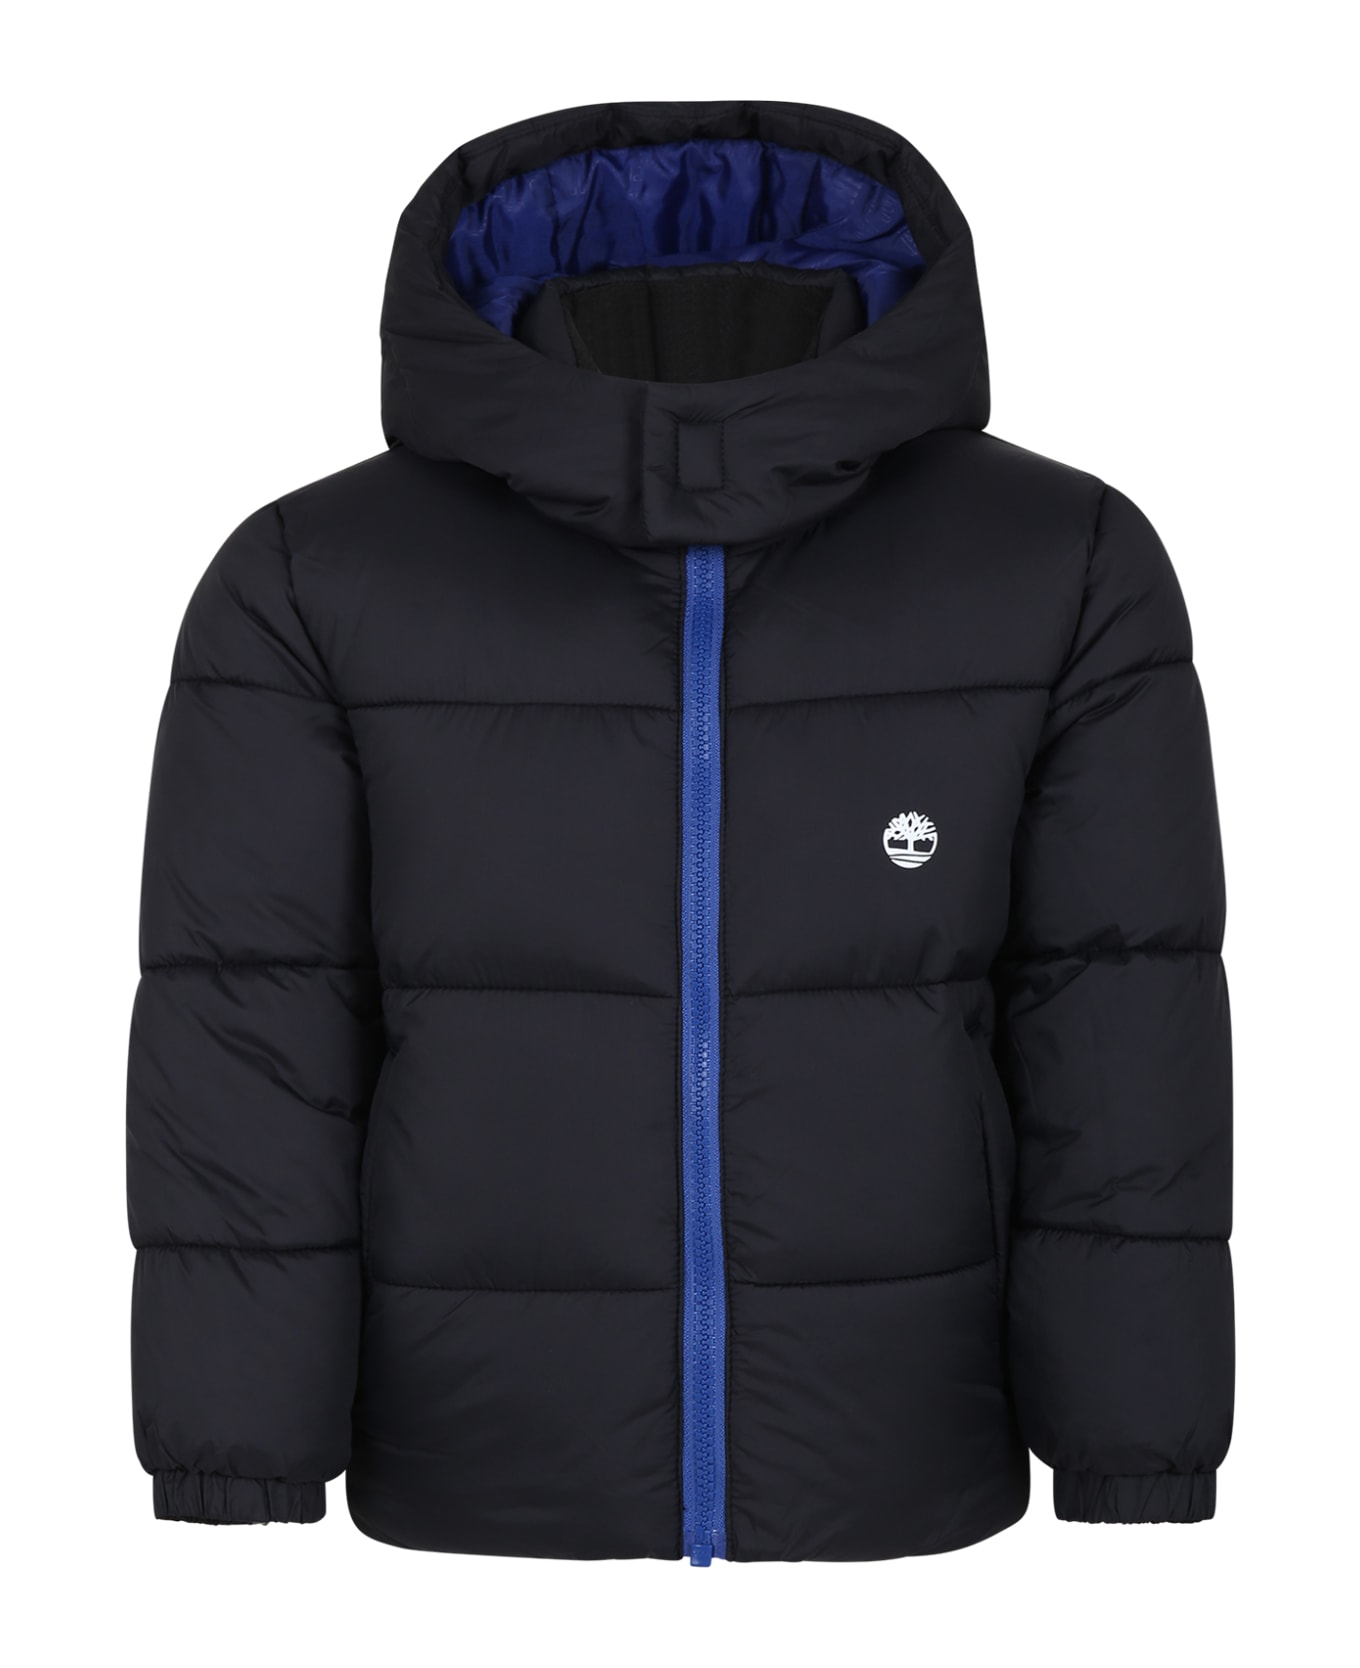 Timberland Black Down Jacket For Boy With Tree - Black